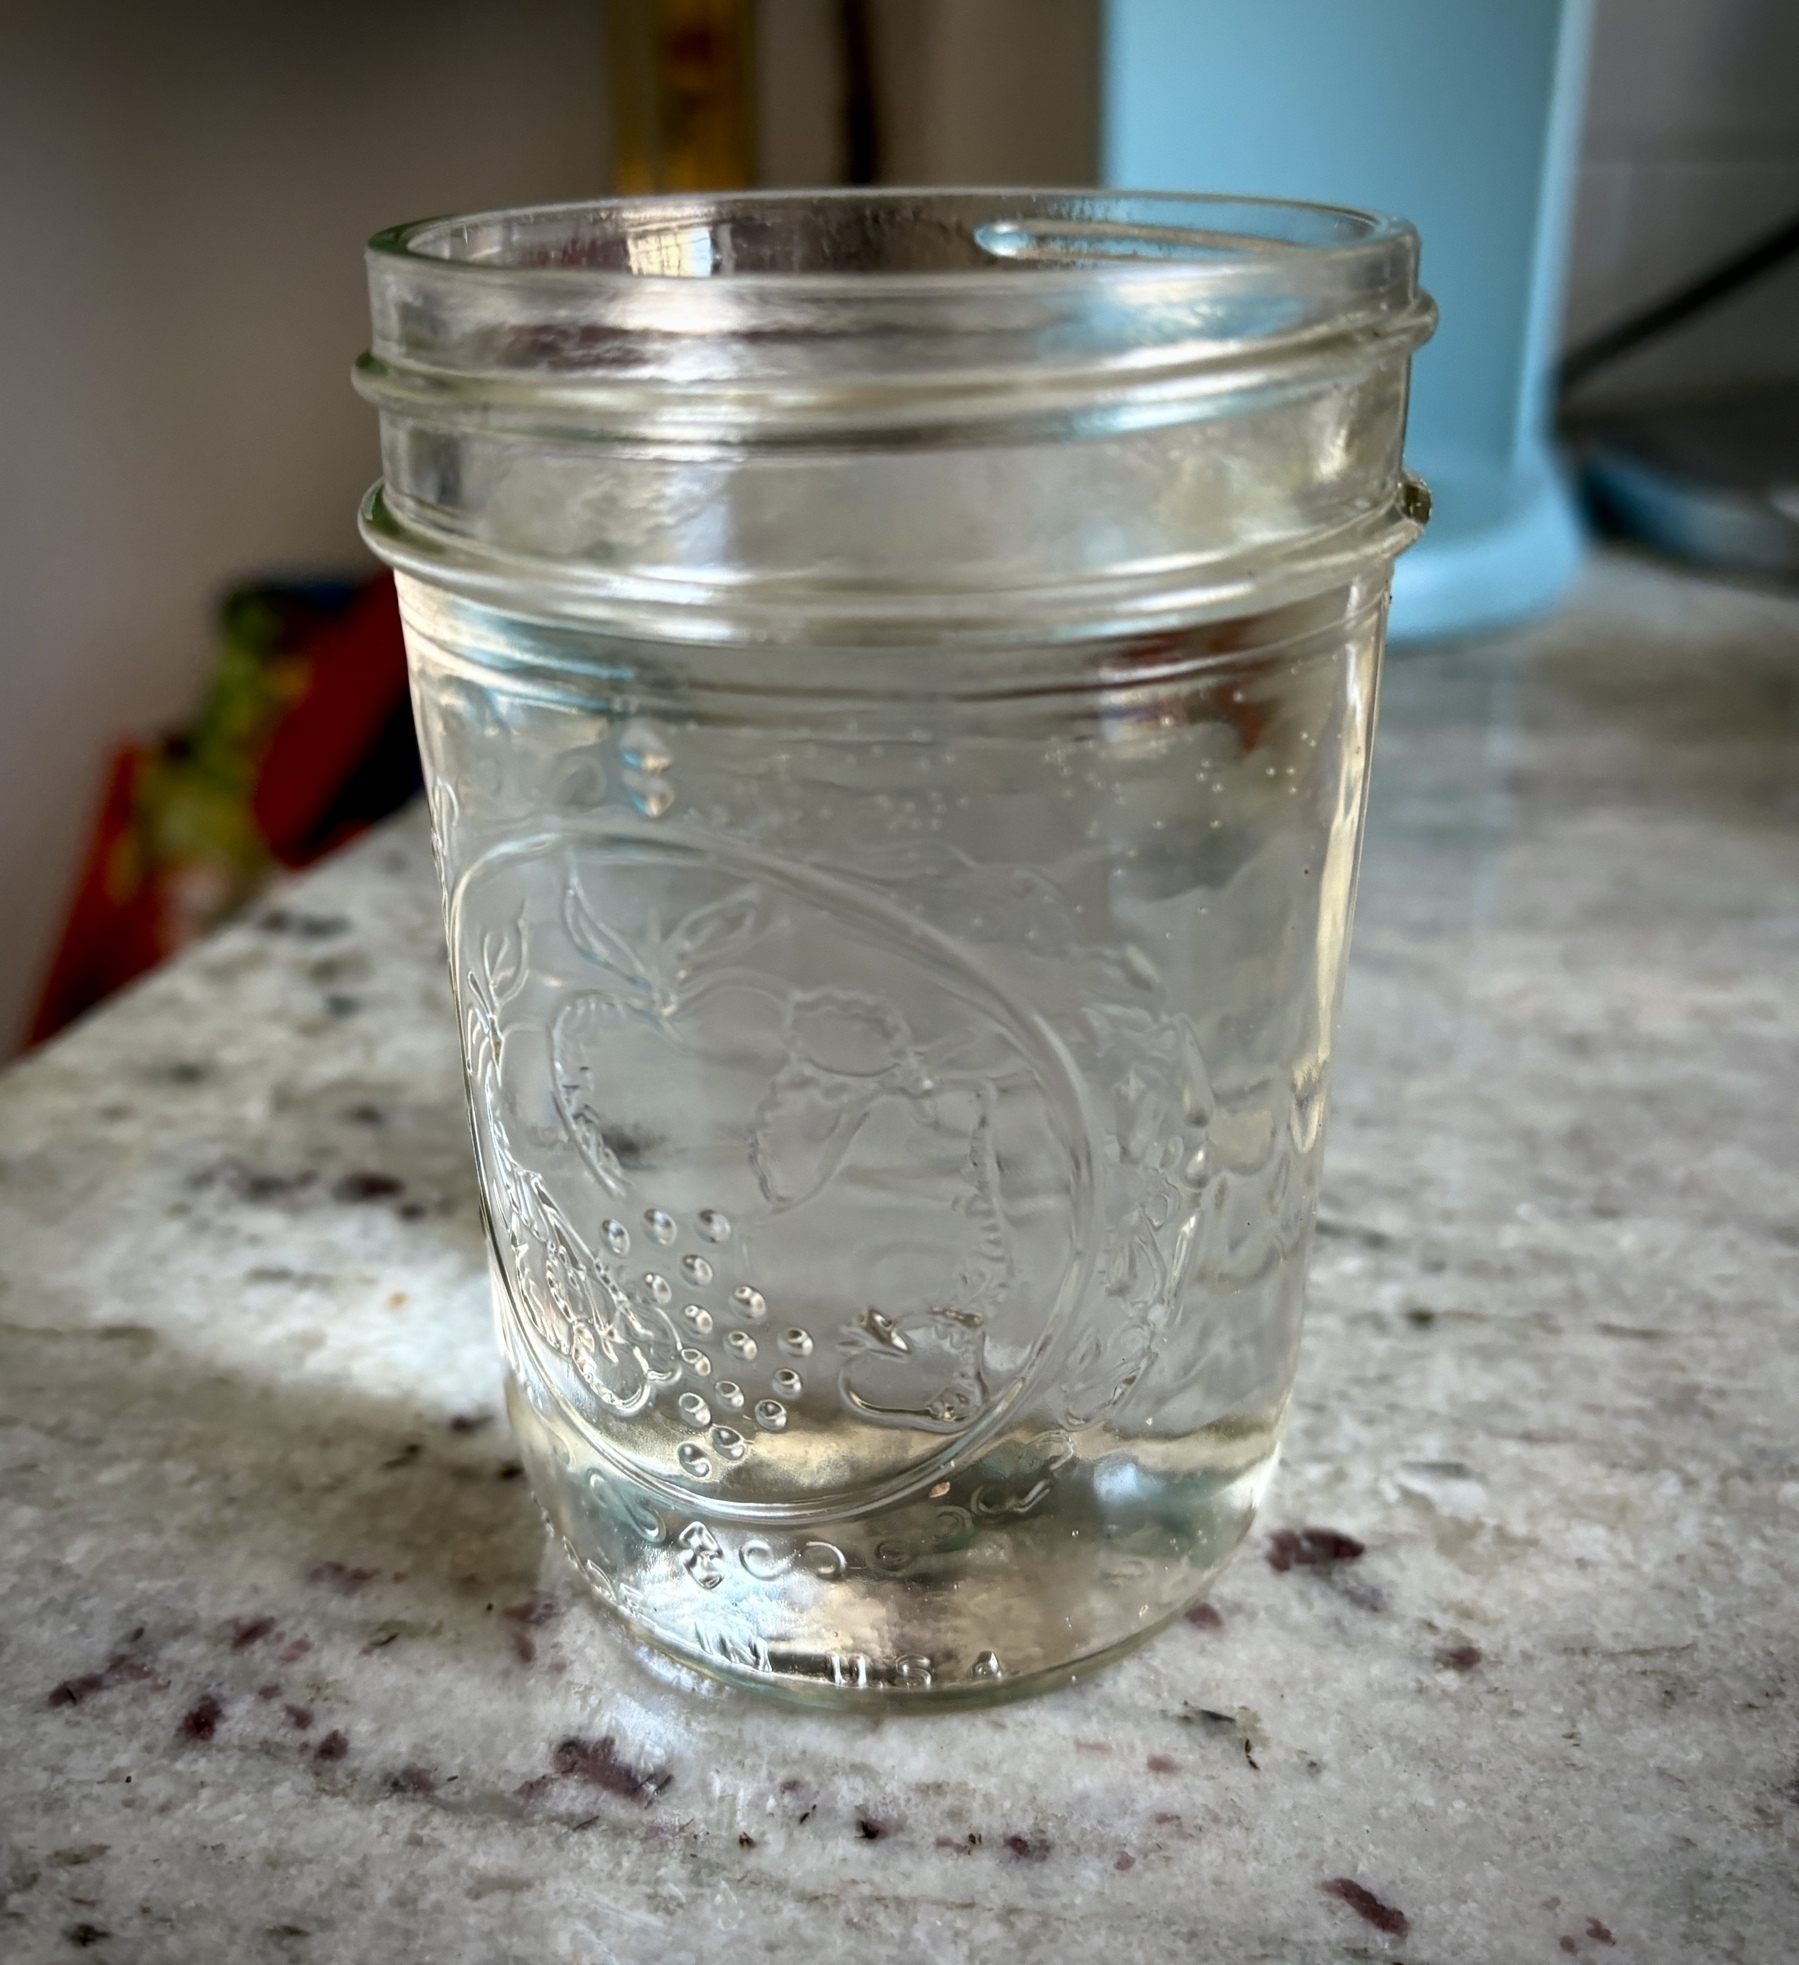  A clear glass jar with embossed designs filled with carbonated water sitting on a kitchen countertop